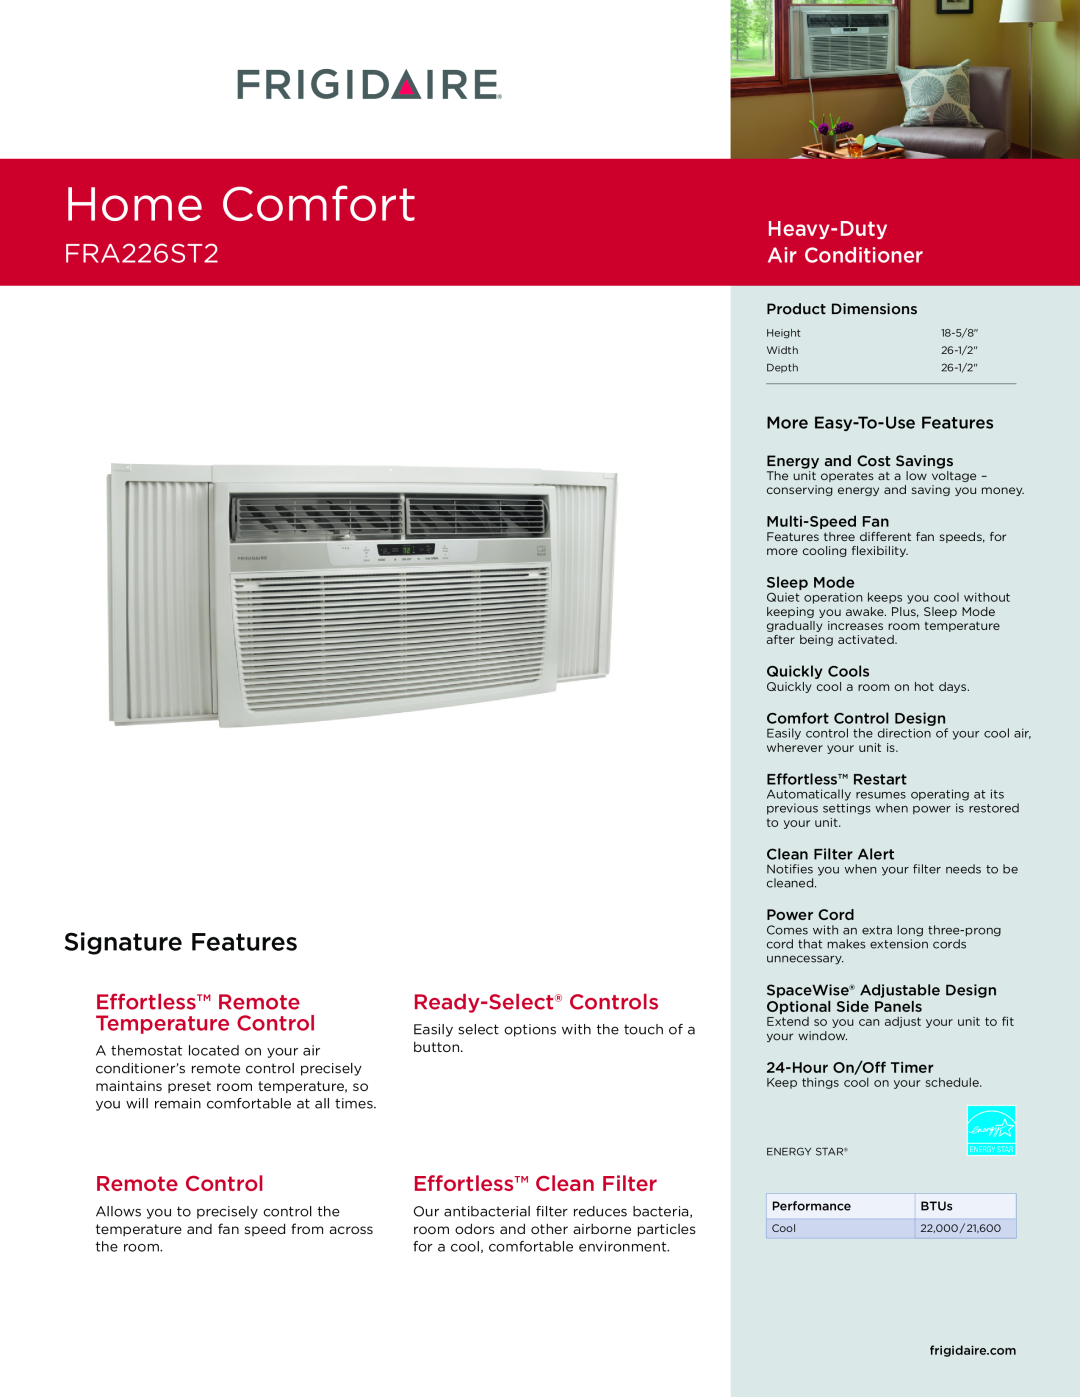 Frigidaire FRA226ST2 dimensions Home Comfort, Signature Features, Heavy-Duty Air Conditioner , Ready-Select Controls 